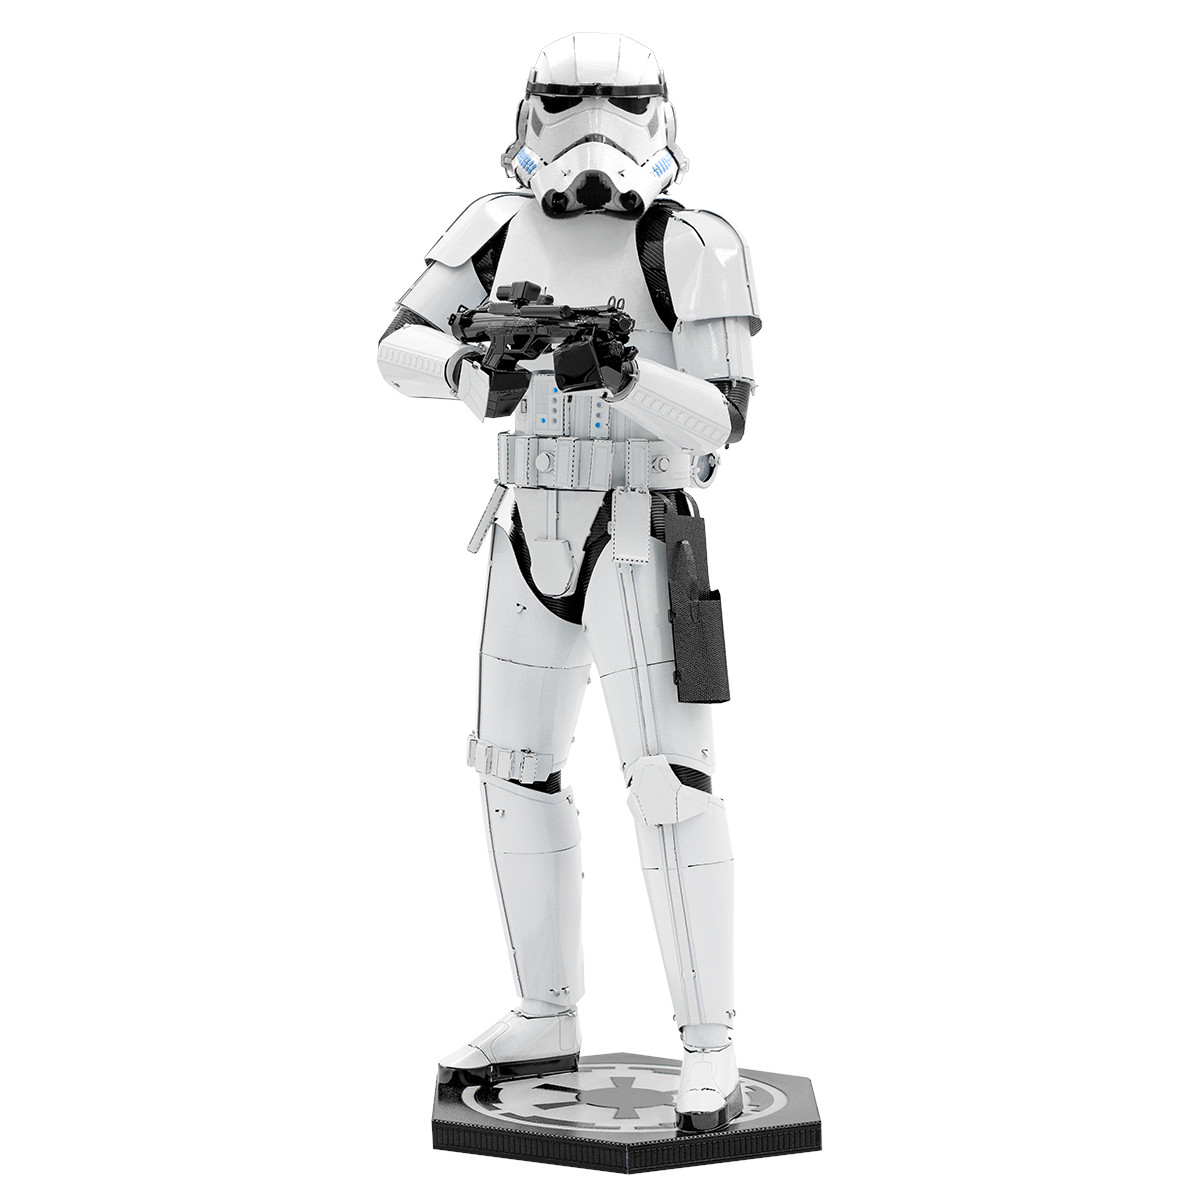 Metal Earth ICONX Stormtrooper 3D Model Kit (ICX134)